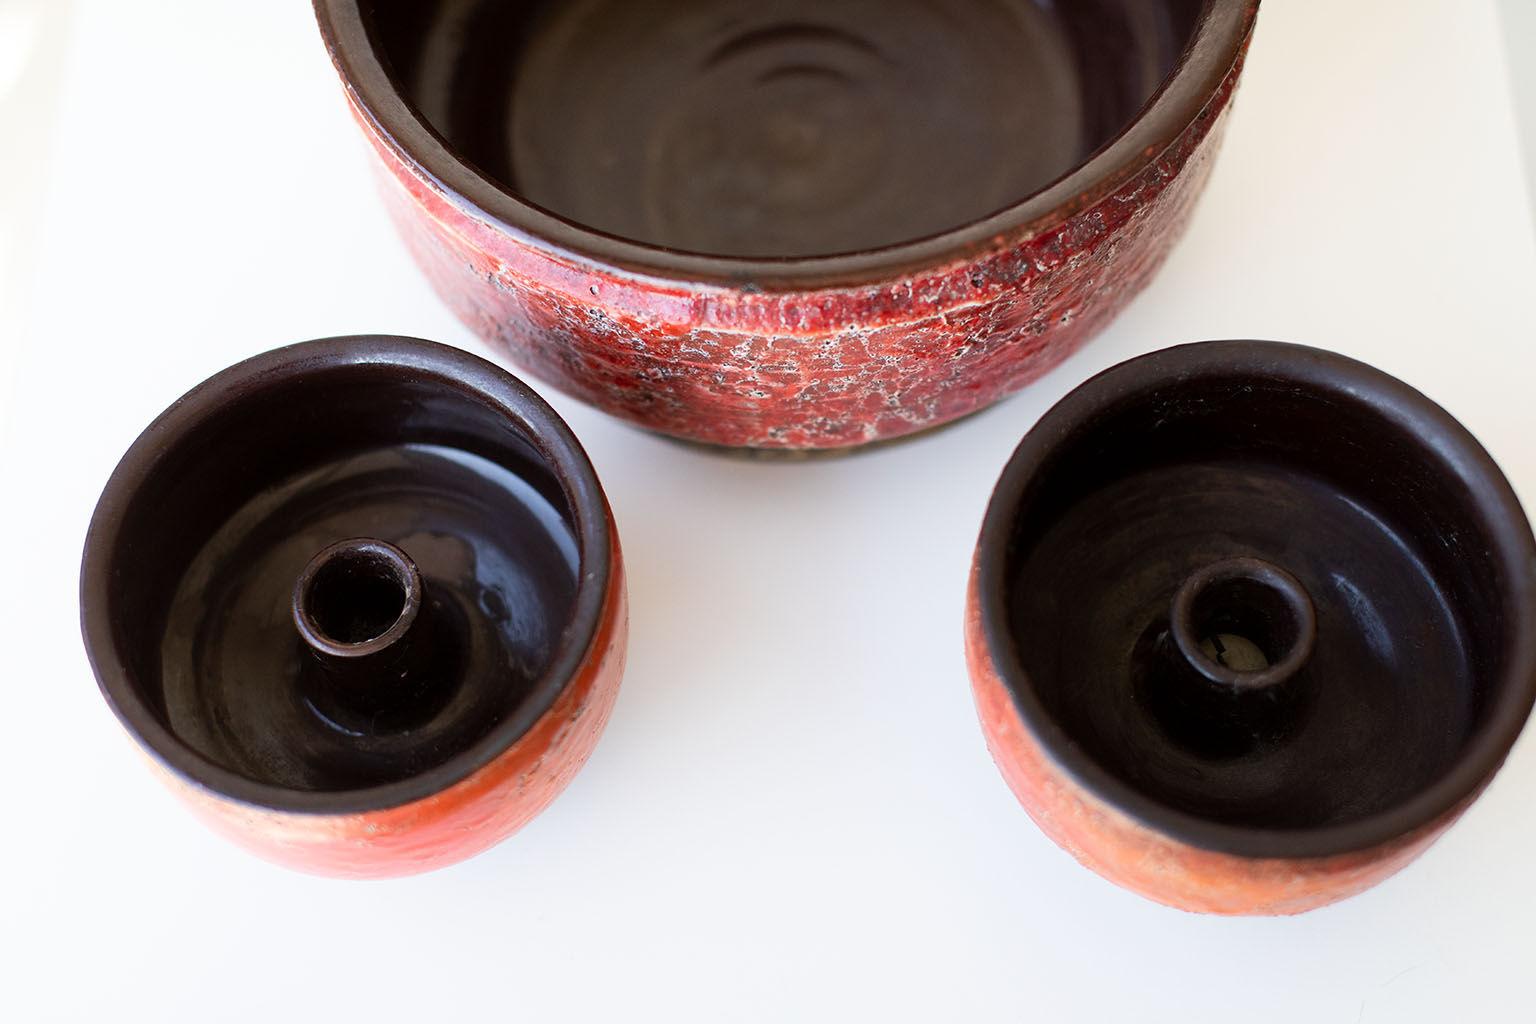 Designer: Unknown

Importer: Raymore
Period/Model: Mid-Century Modern
Specs: Pottery


These mid century Italian pottery candle holders are in vintage condition. One of the vessels has a small chip to the top which has been painted